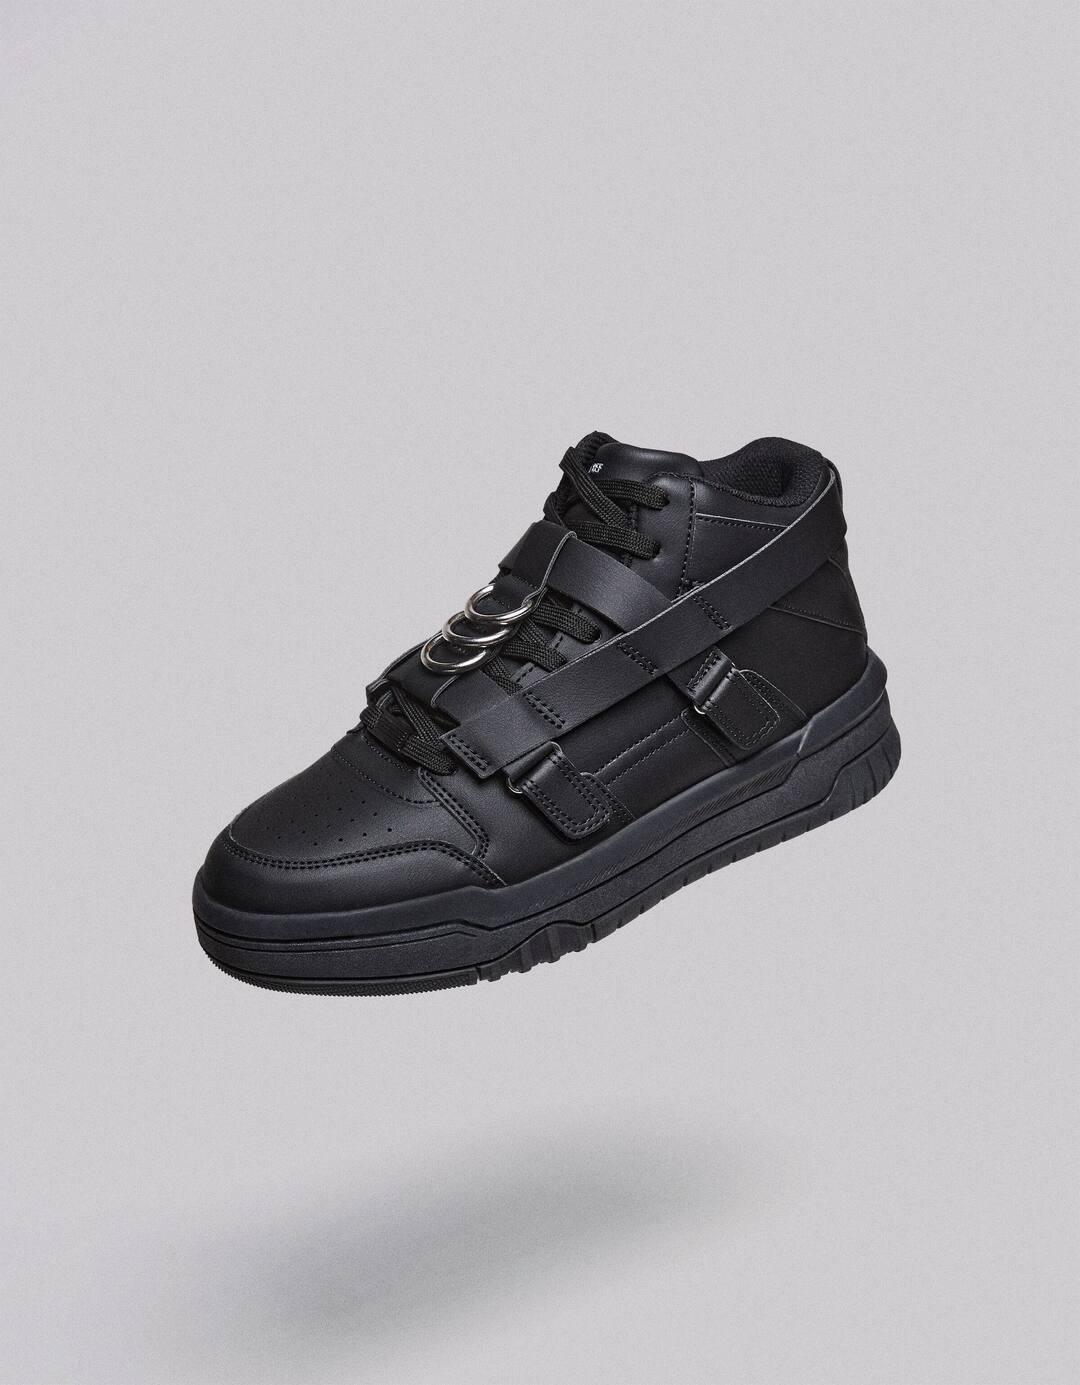 Men’s high-top trainers with removable harness